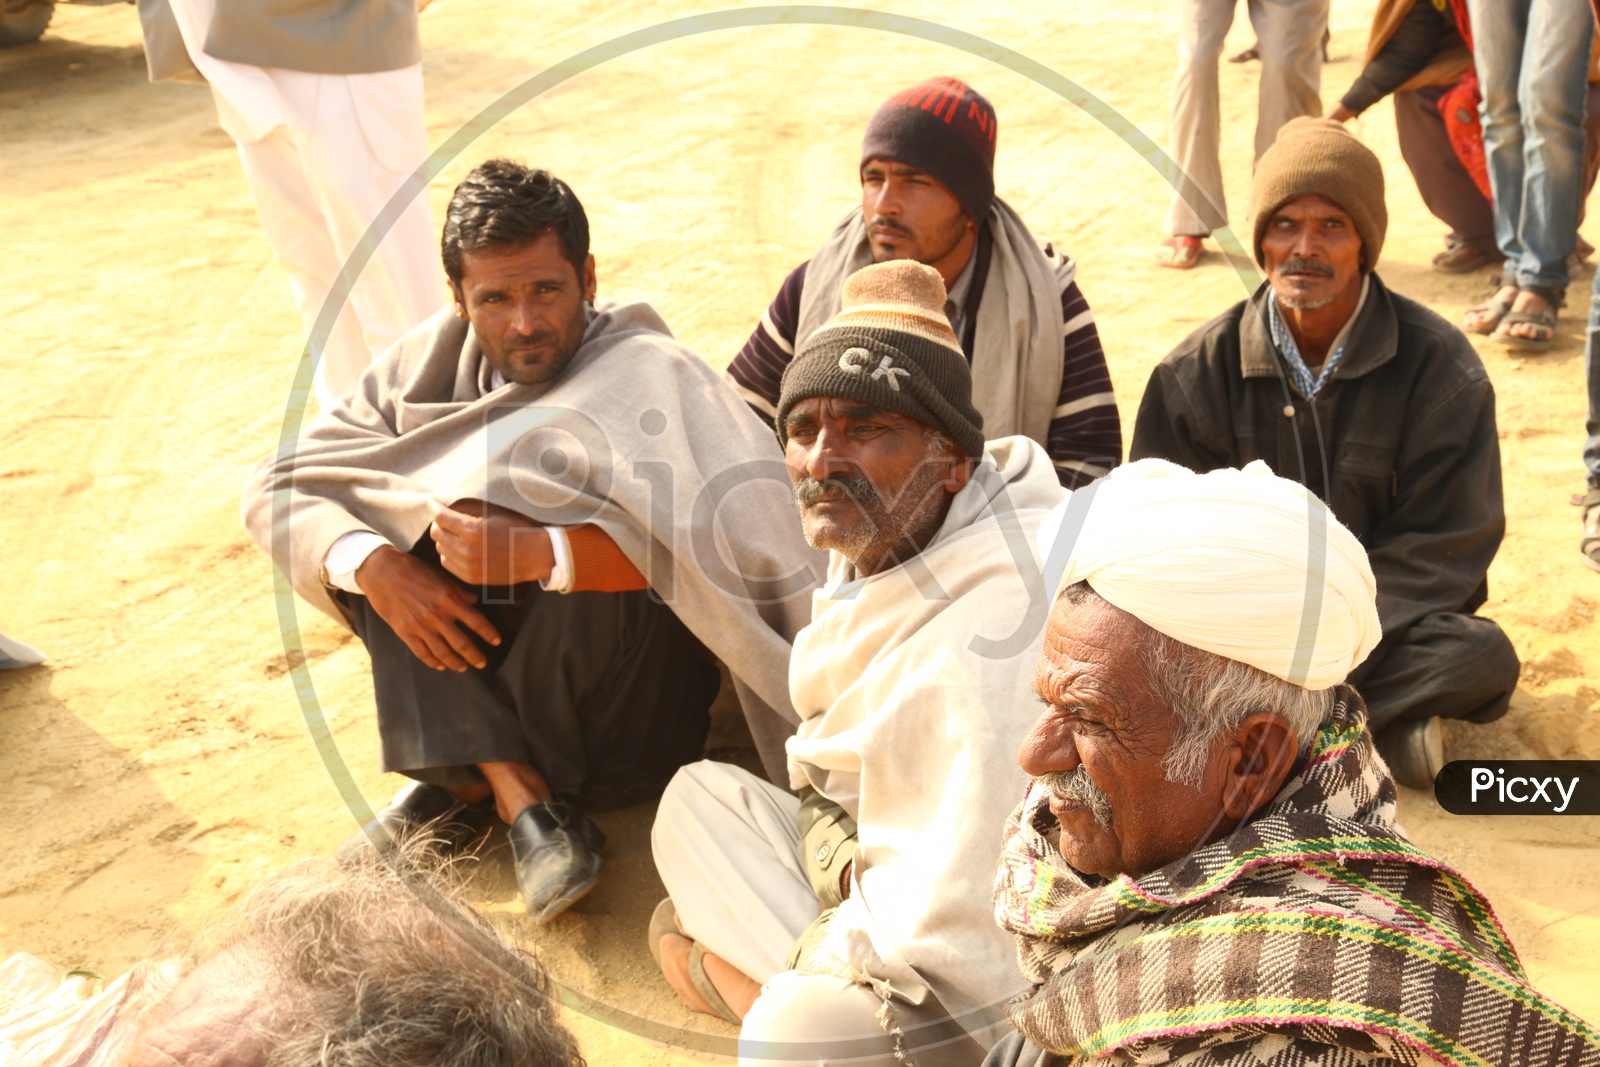 Rajasthan Local People Sitting on Ground like a  Group